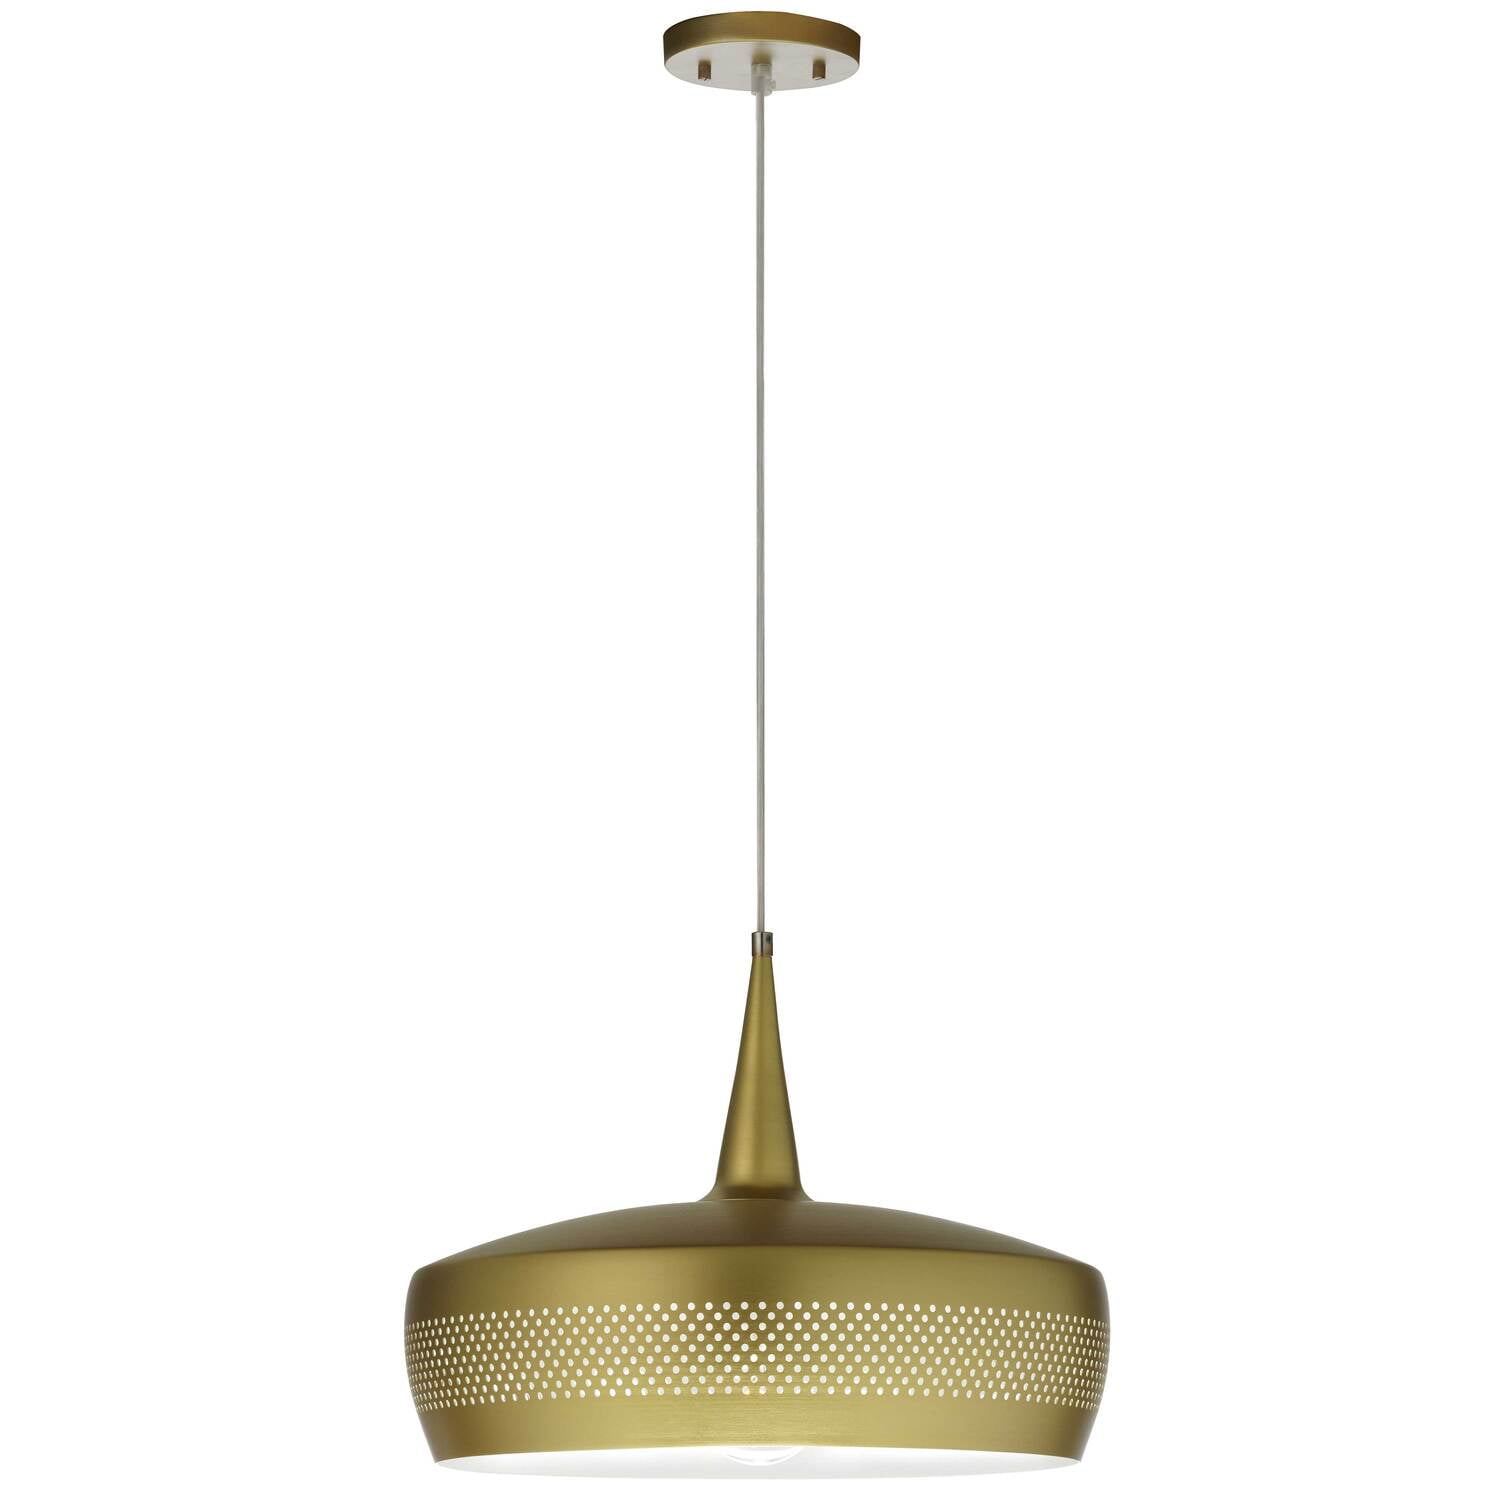 Picture of Dainolite PXE-161P-AGB Pixie 1 Light Incandescent Pendant, Painted Aged Brass